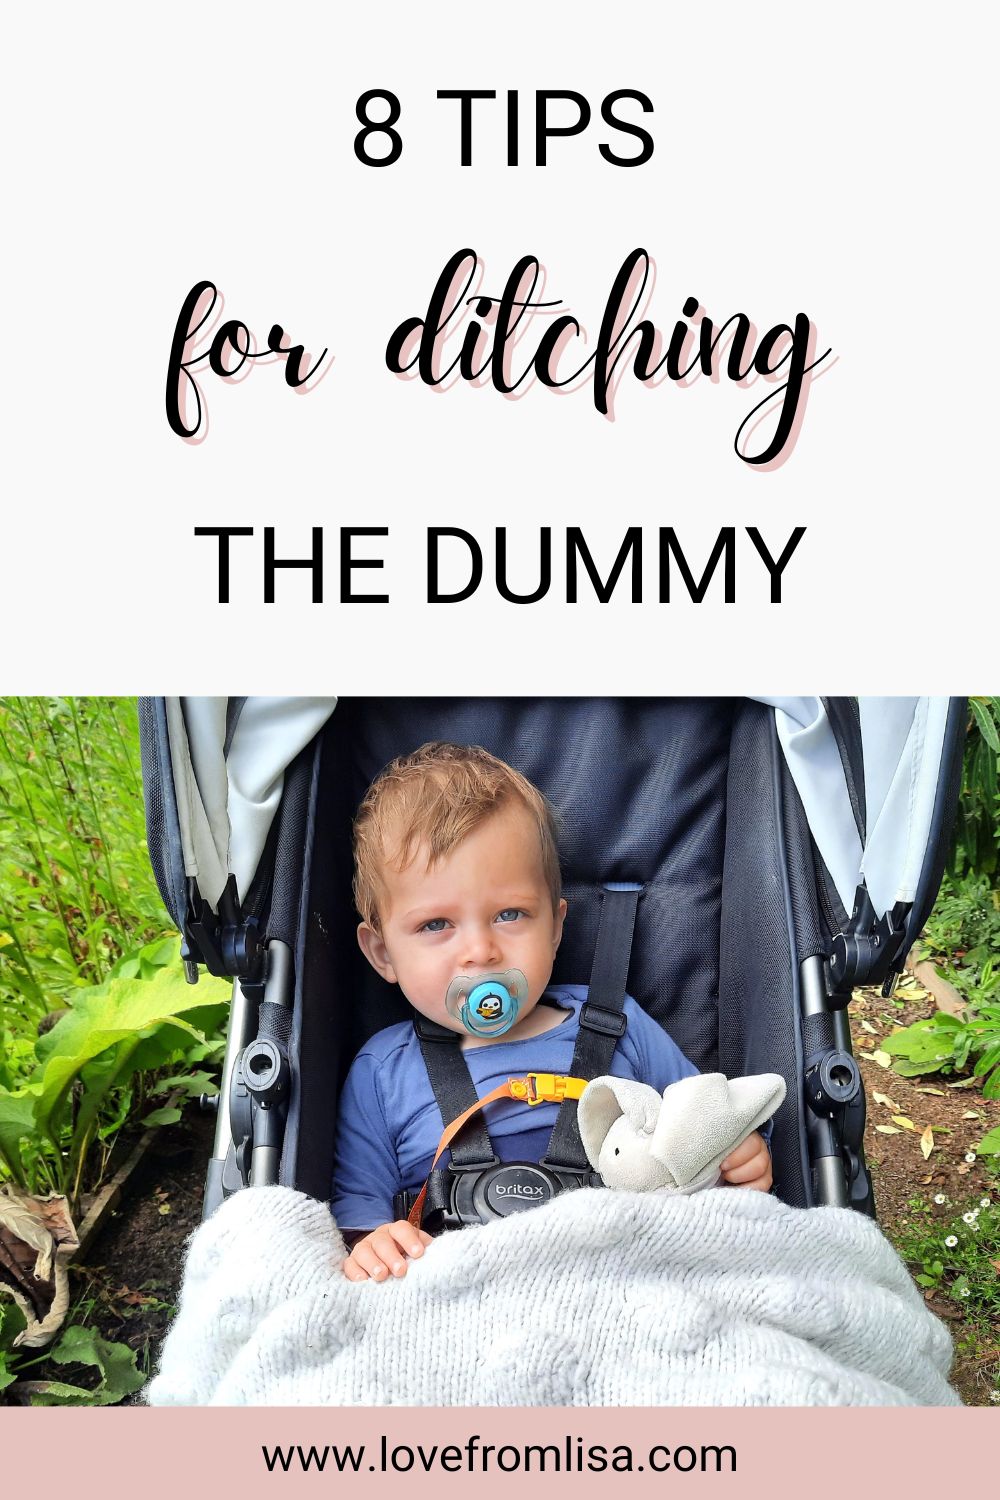 8 tips for ditching the dummy